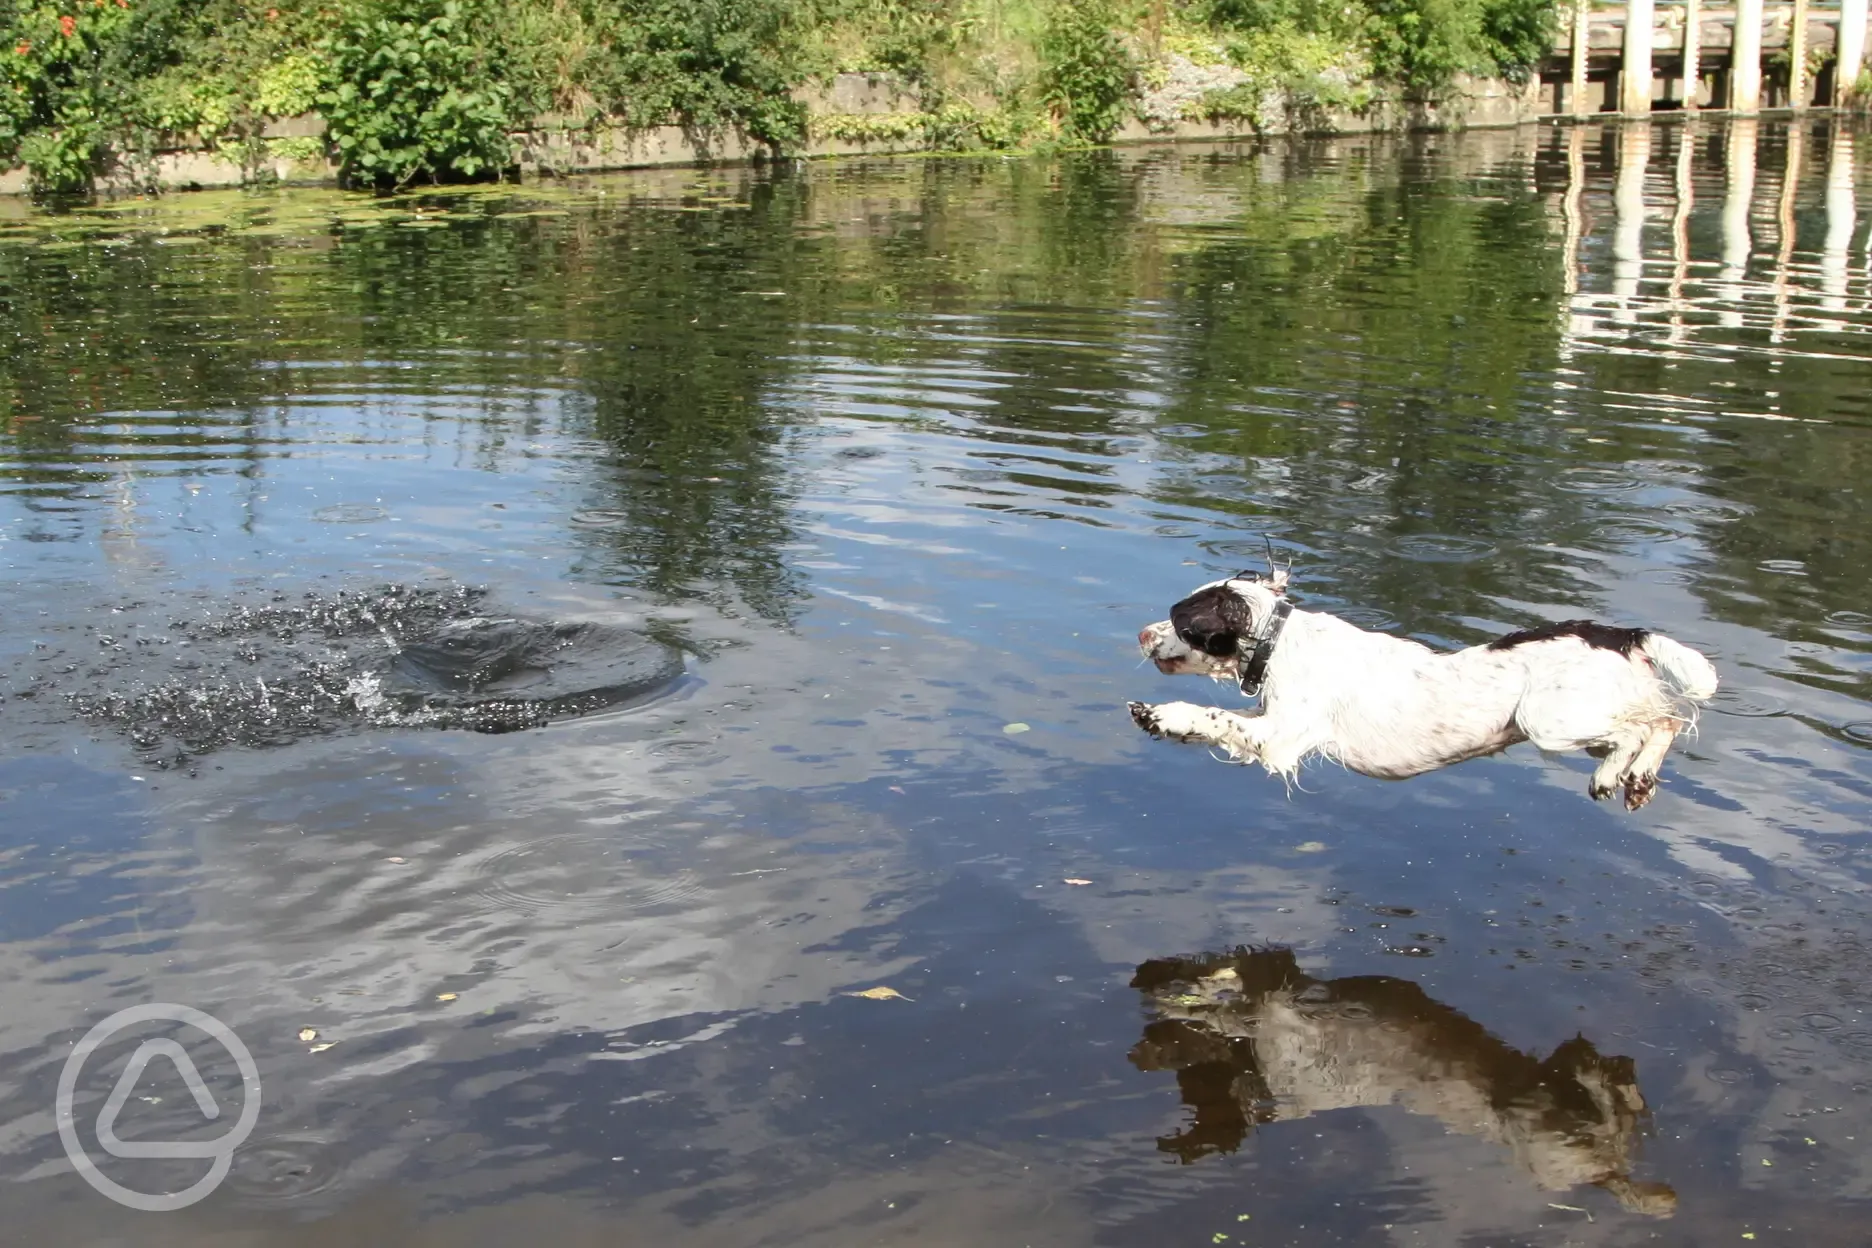 Dogs cooling off in the river